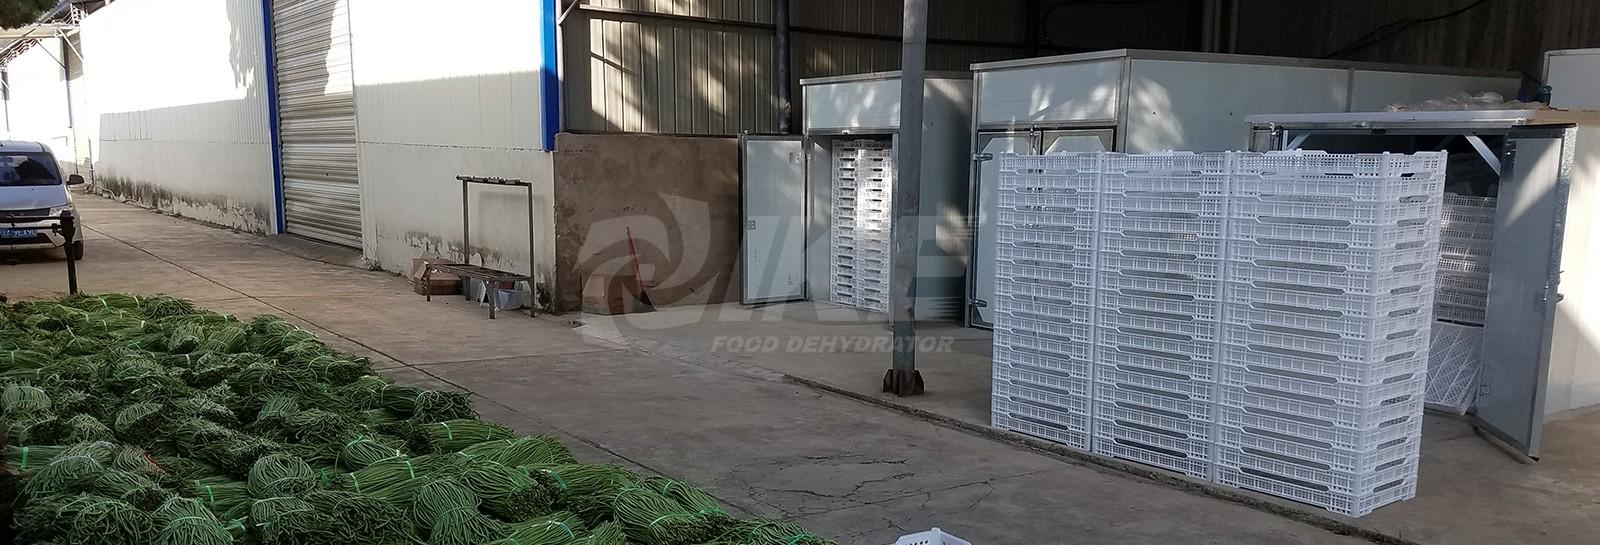 stainless sale drying industrial IKE Brand dehydrator machine supplier